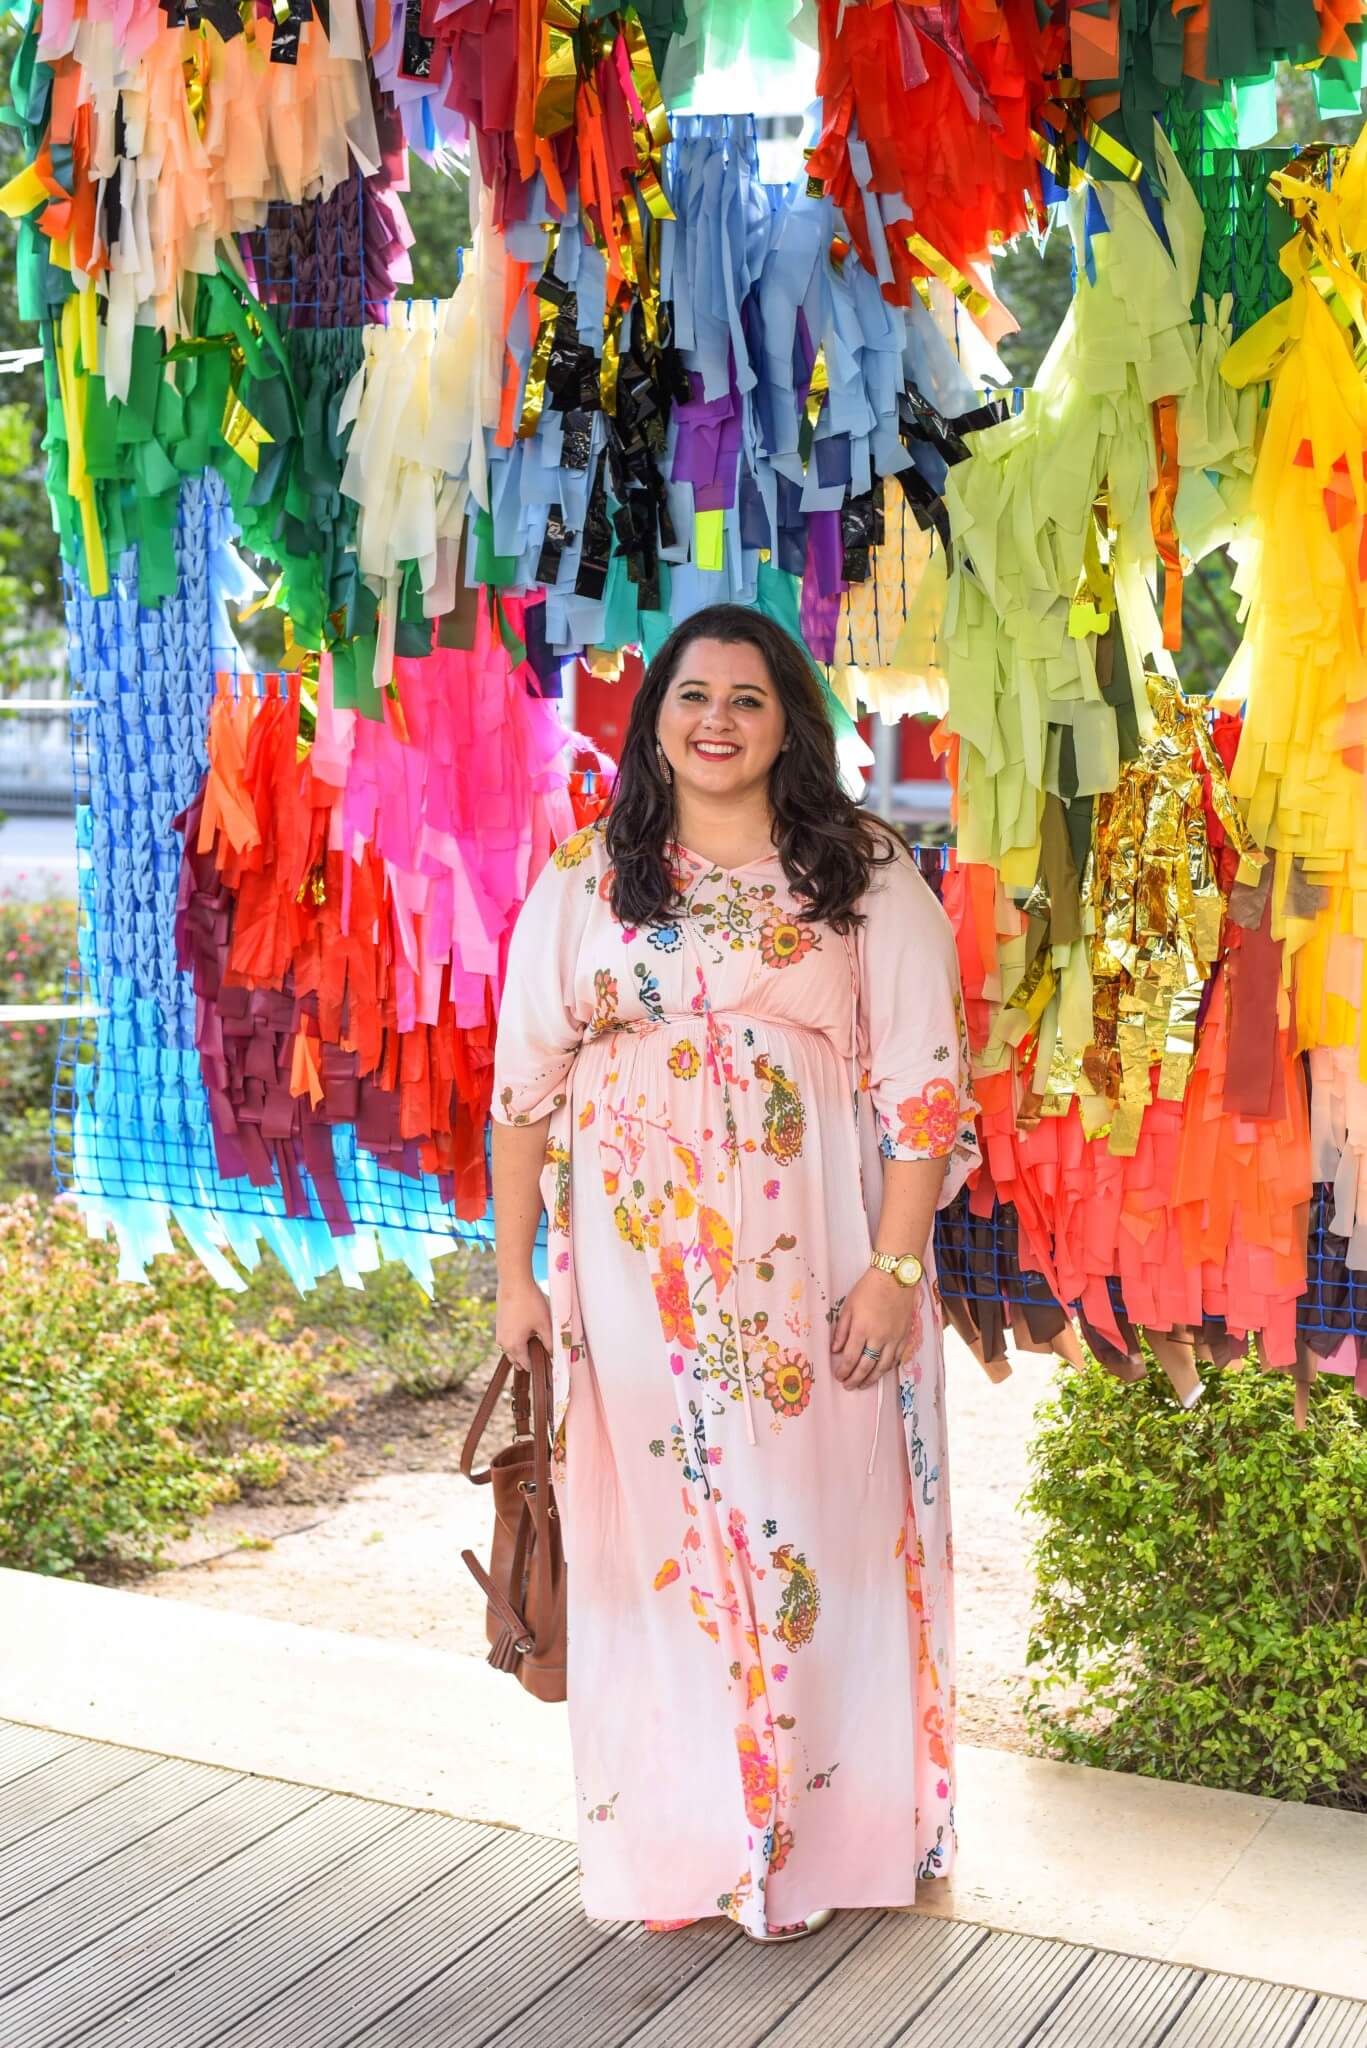 When looking for a maxi dress to include in my curvy closet, I always look for something that can easily transition from day to night. This plus size maxi dress from my Gwynnie Bee clothing subscription was perfect for roaming around Houston. #plussizefashion #plussizedresses